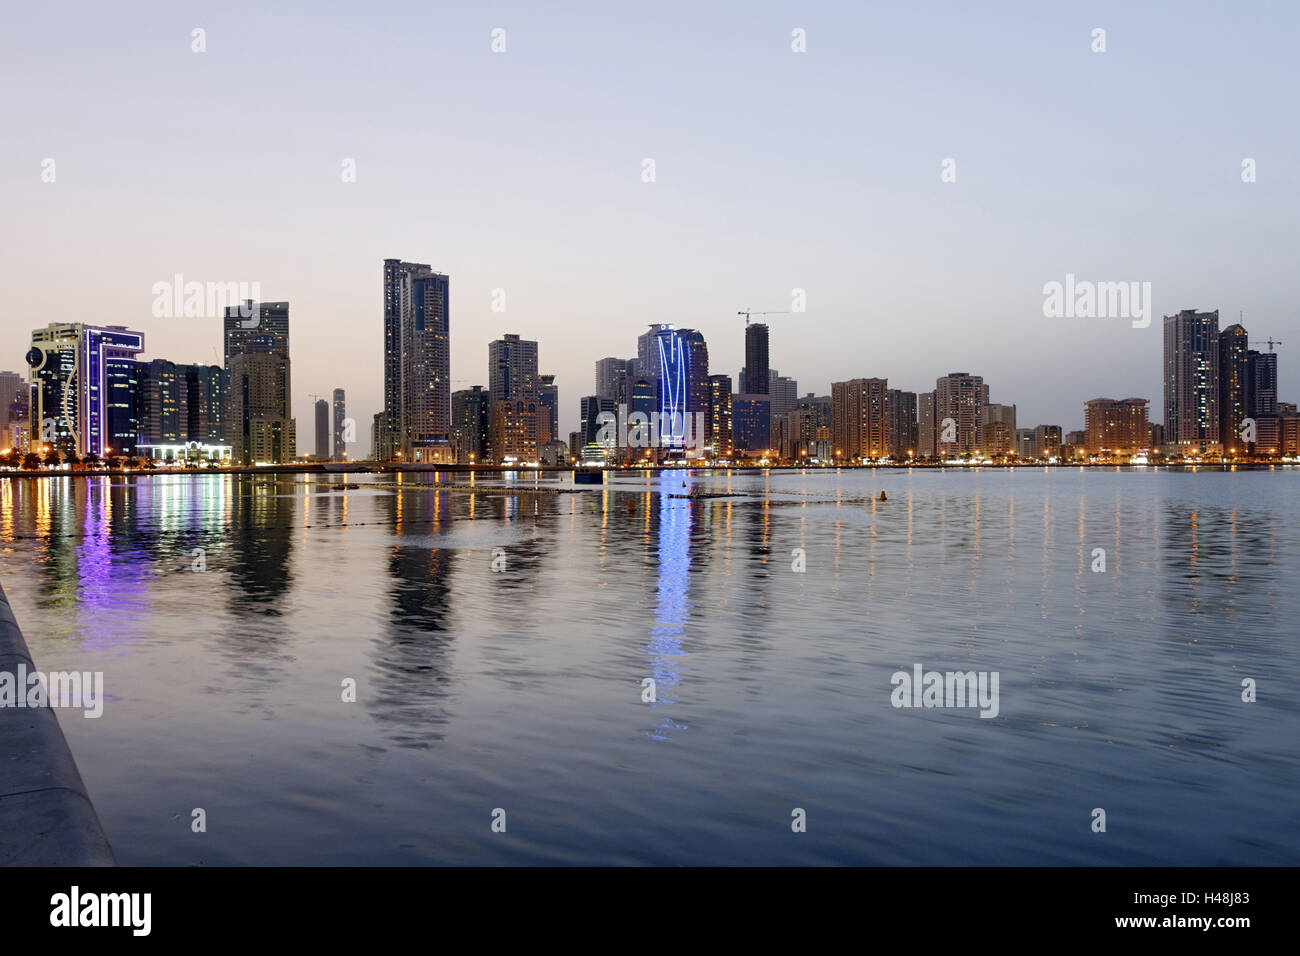 Skyline with dusk, Golden Mile, Corniche Street, modern office buildings, architecture, emirate Sharjah, United Arab Emirates, Arabian peninsula, the Middle East, Asia, Stock Photo